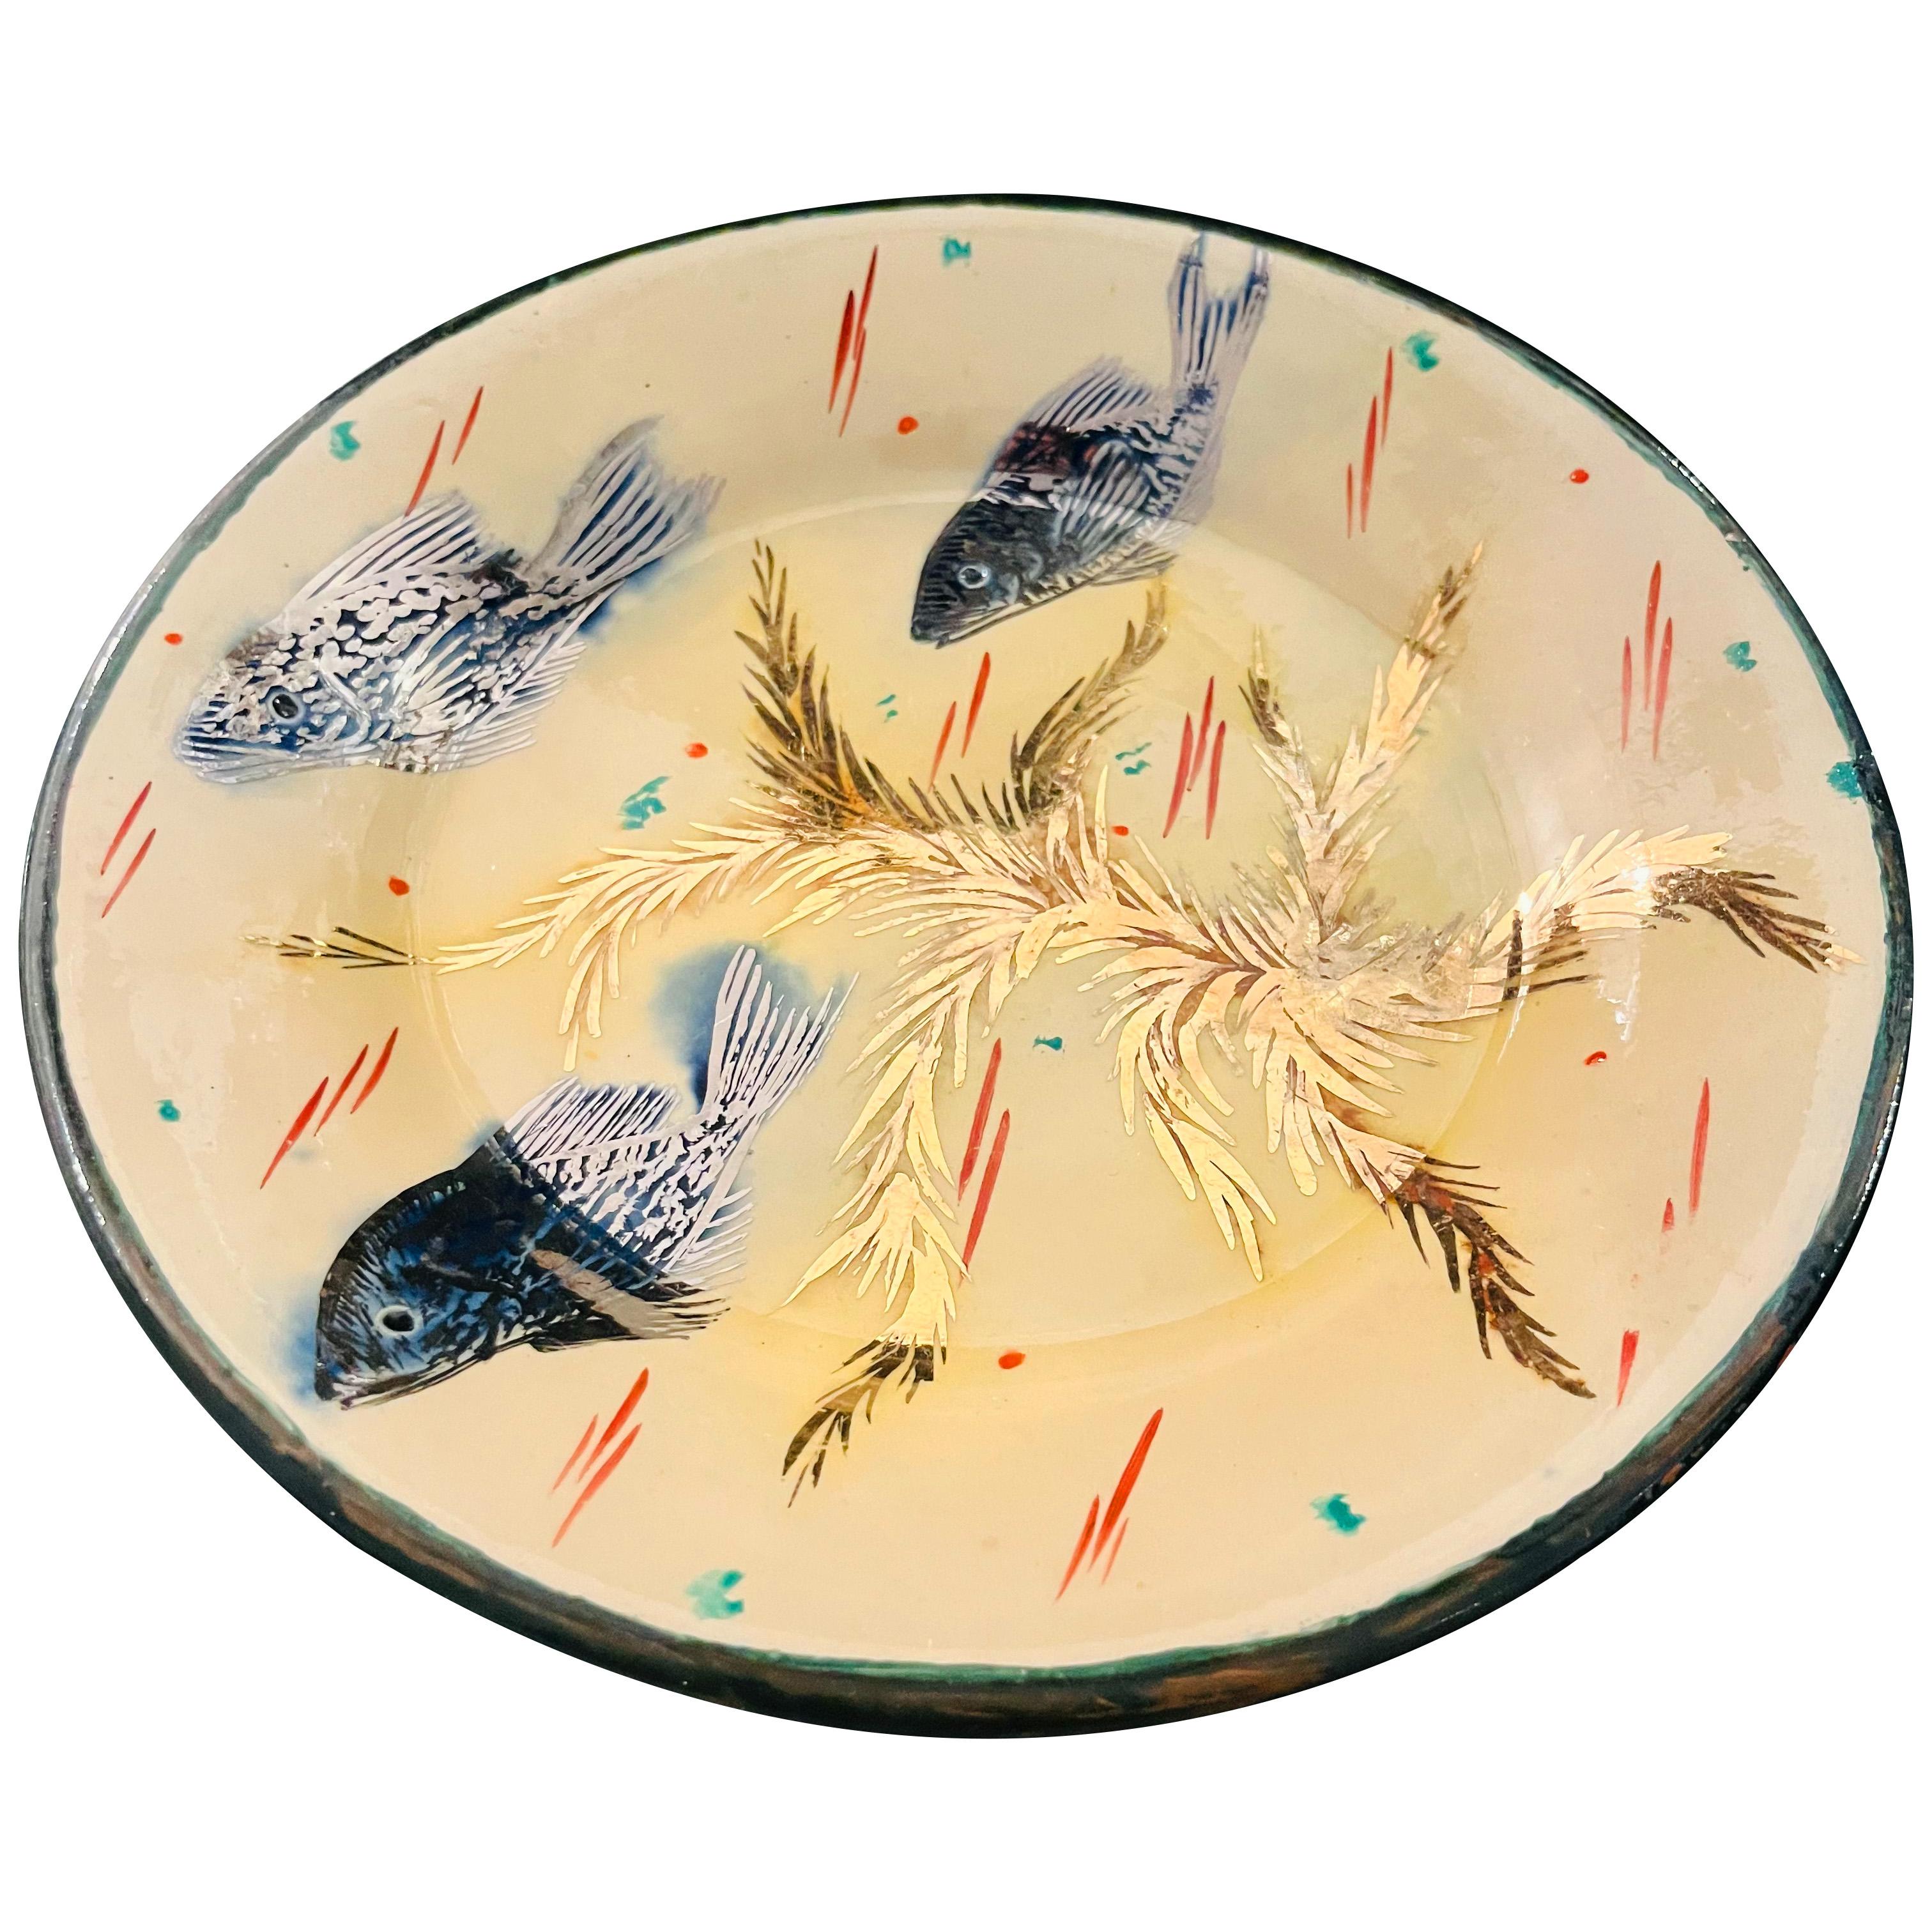 Dessert plate decorated with a colourful aquatic scene, shining with the delicate gold and silver reflections of the enamel paint. Three small blue fish enhanced with silver swim around golden seaweed. These hand-drawn designs by Catalan artist